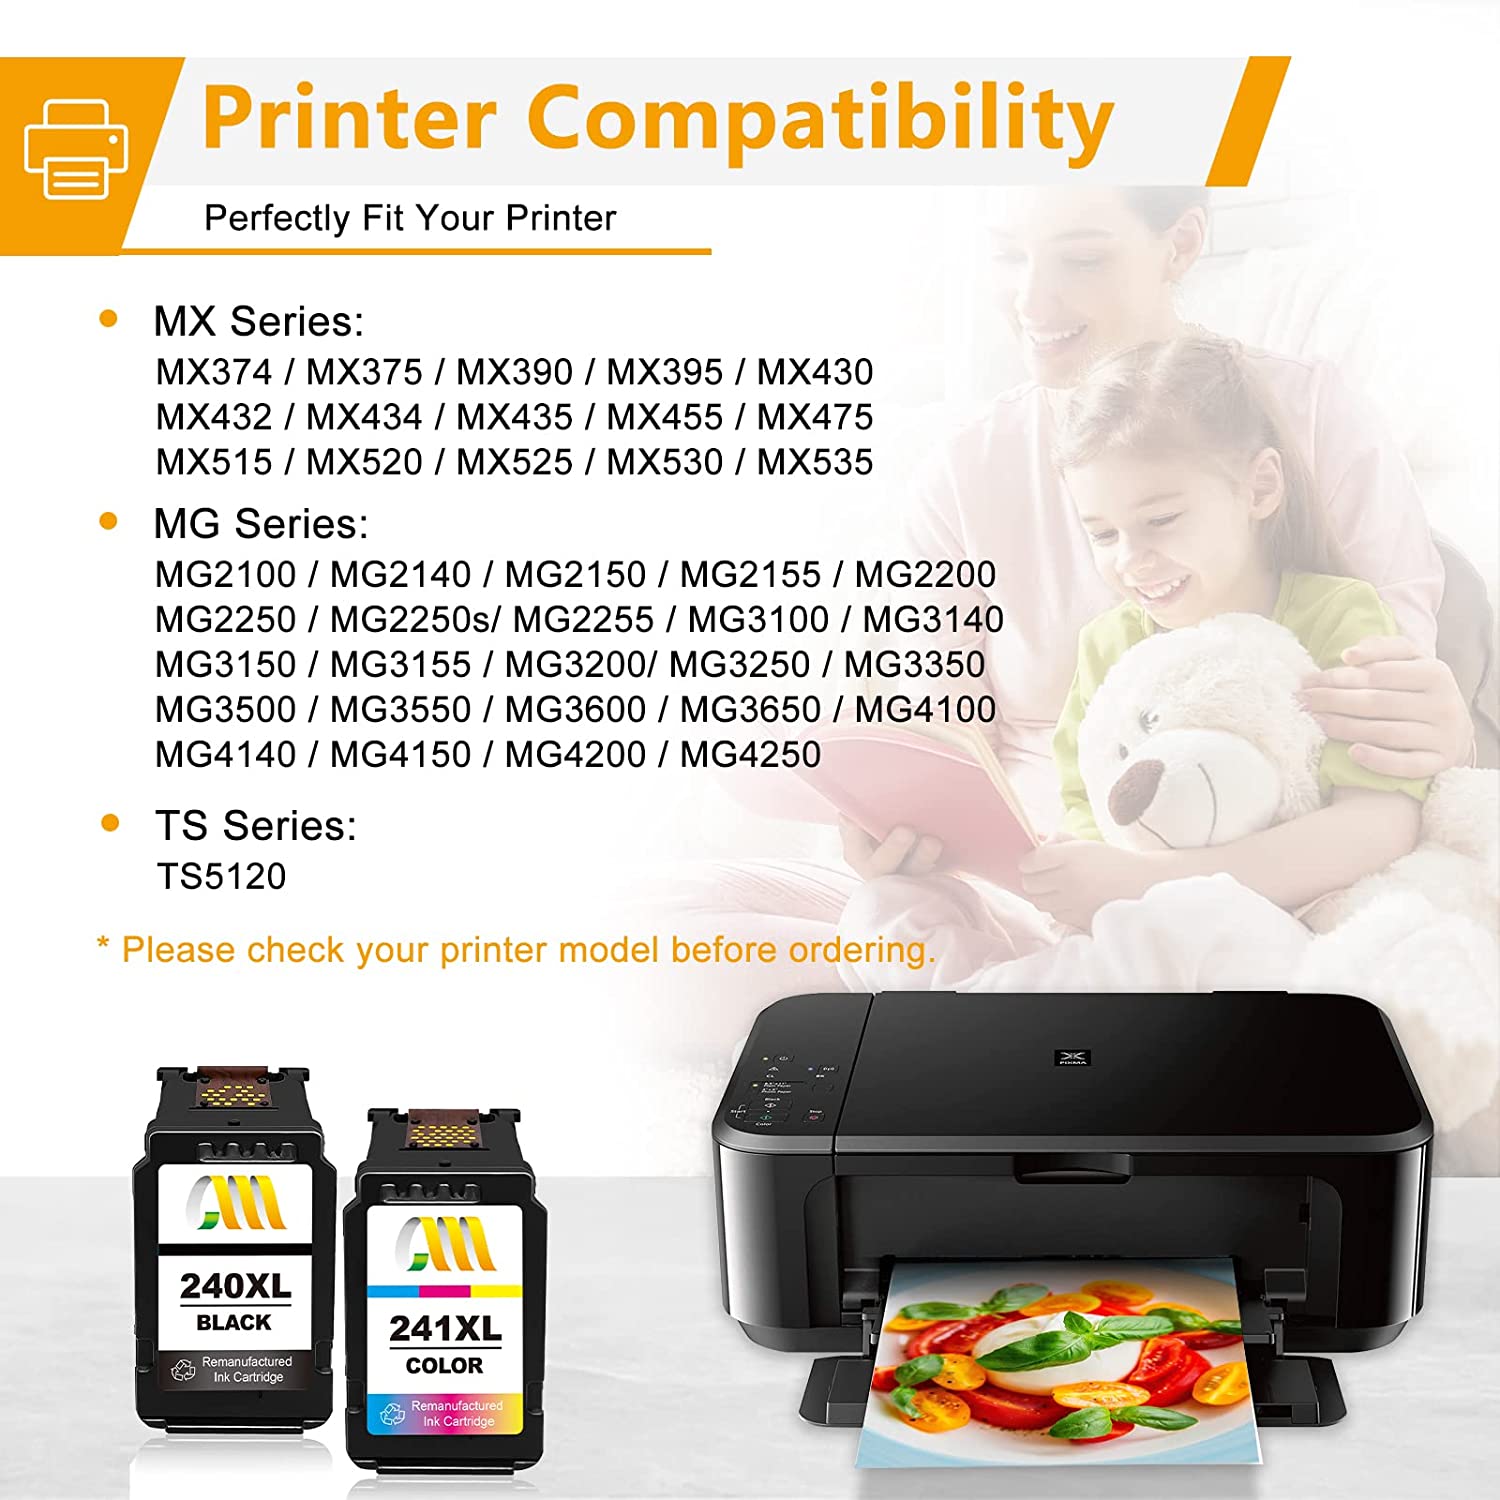 Ink Cartridge Replacement For Canon 240Xl 241Xl Combo Pack Pg-240Xl/Cl-241Xl Ink For Pixma Mg3620 Ts5120 Mg522 Mg3520 Mg2120 Mx532 Mx472 Mx452 Printer (1 Black ..